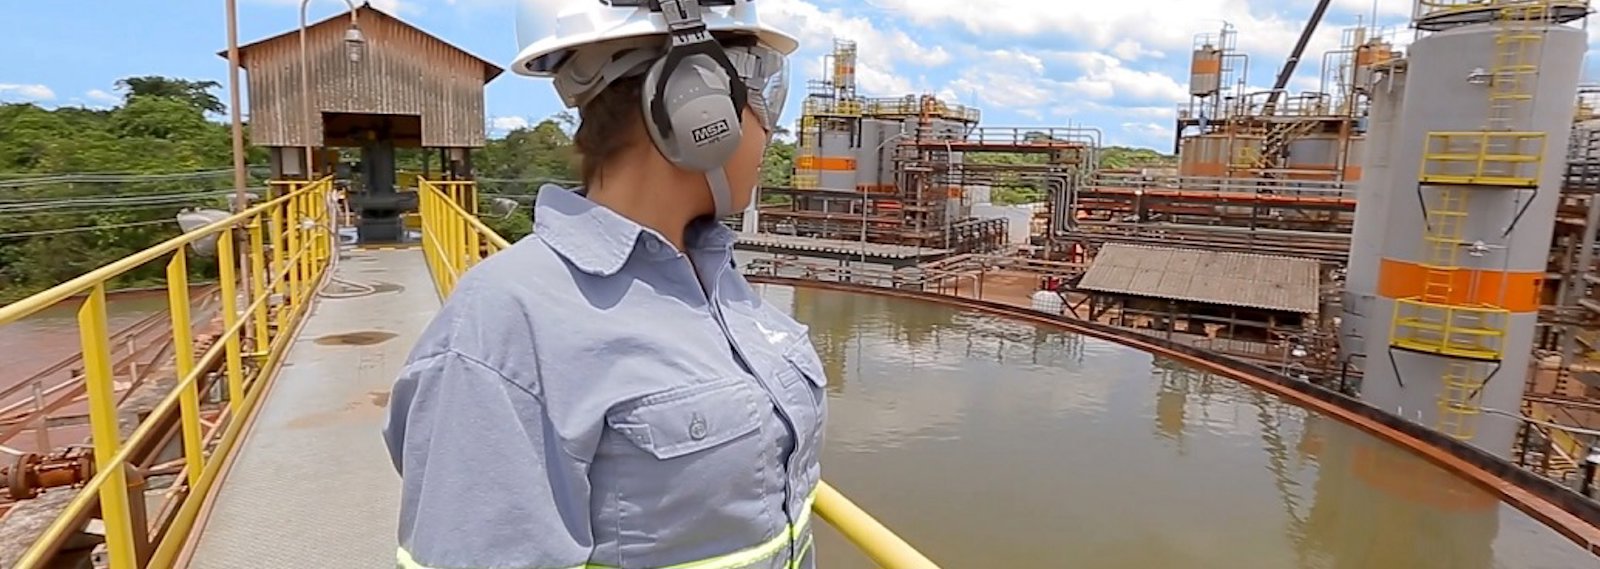 Alunorte's female employee stands watching the company's water treatment facility plant in the background